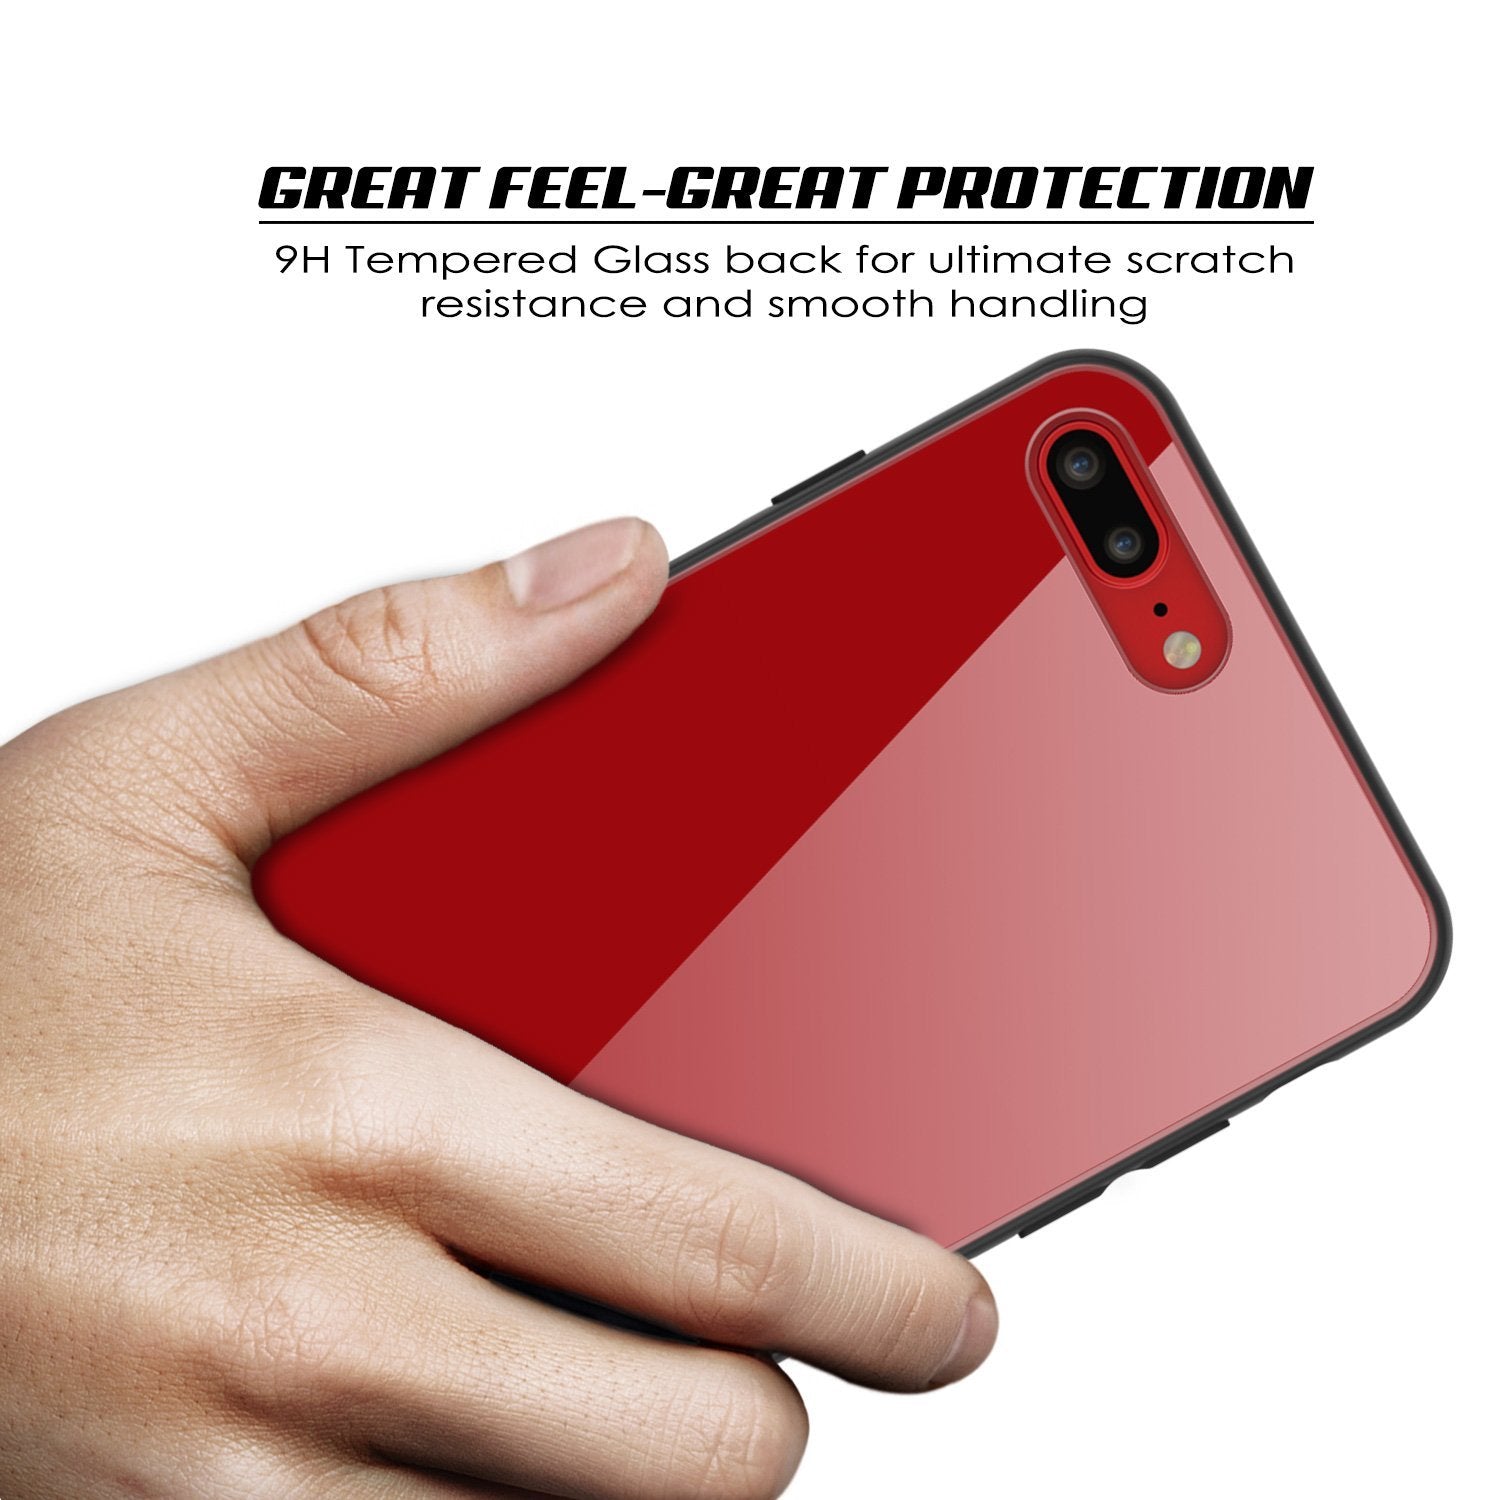 iPhone 8 PLUS Case, Punkcase GlassShield Ultra Thin Protective 9H Full Body Tempered Glass Cover W/ Drop Protection & Non Slip Grip for Apple iPhone 7 PLUS / Apple iPhone 8 PLUS (Red)